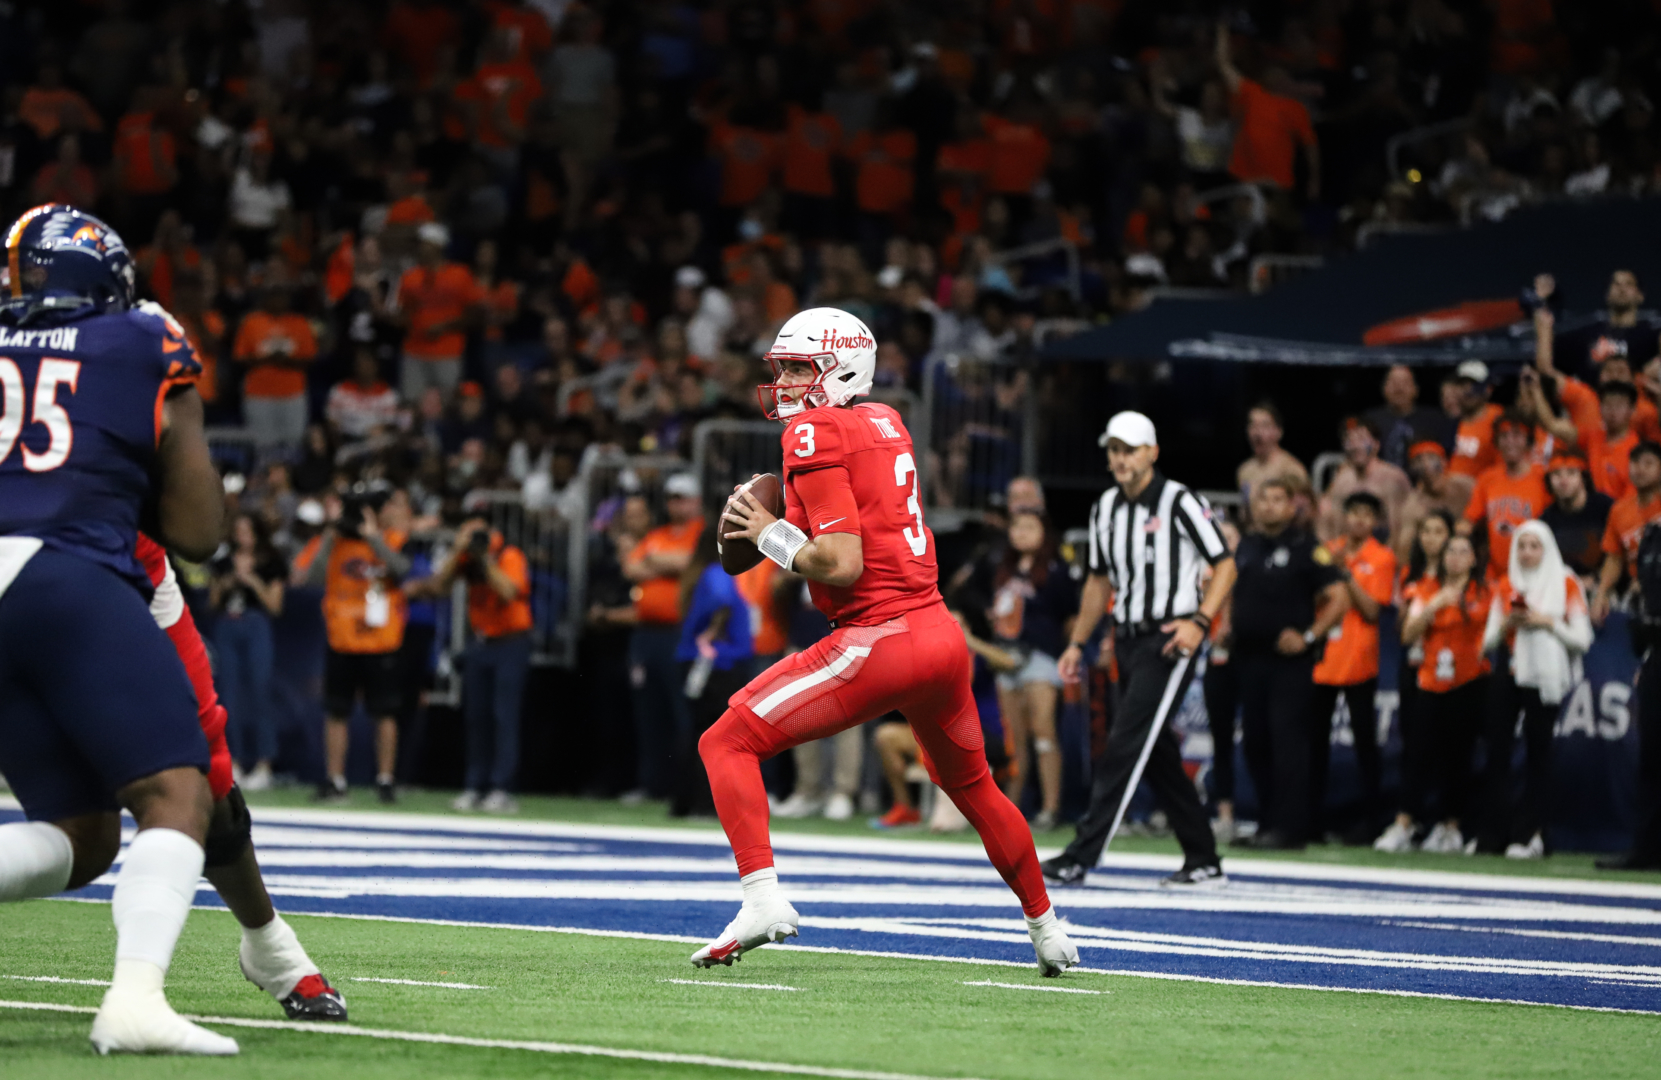 UH football quarterback Clayton Tune looks to bounce back from his four interception performance against Texas Tech a year ago. | Sean Thomas/The Cougar